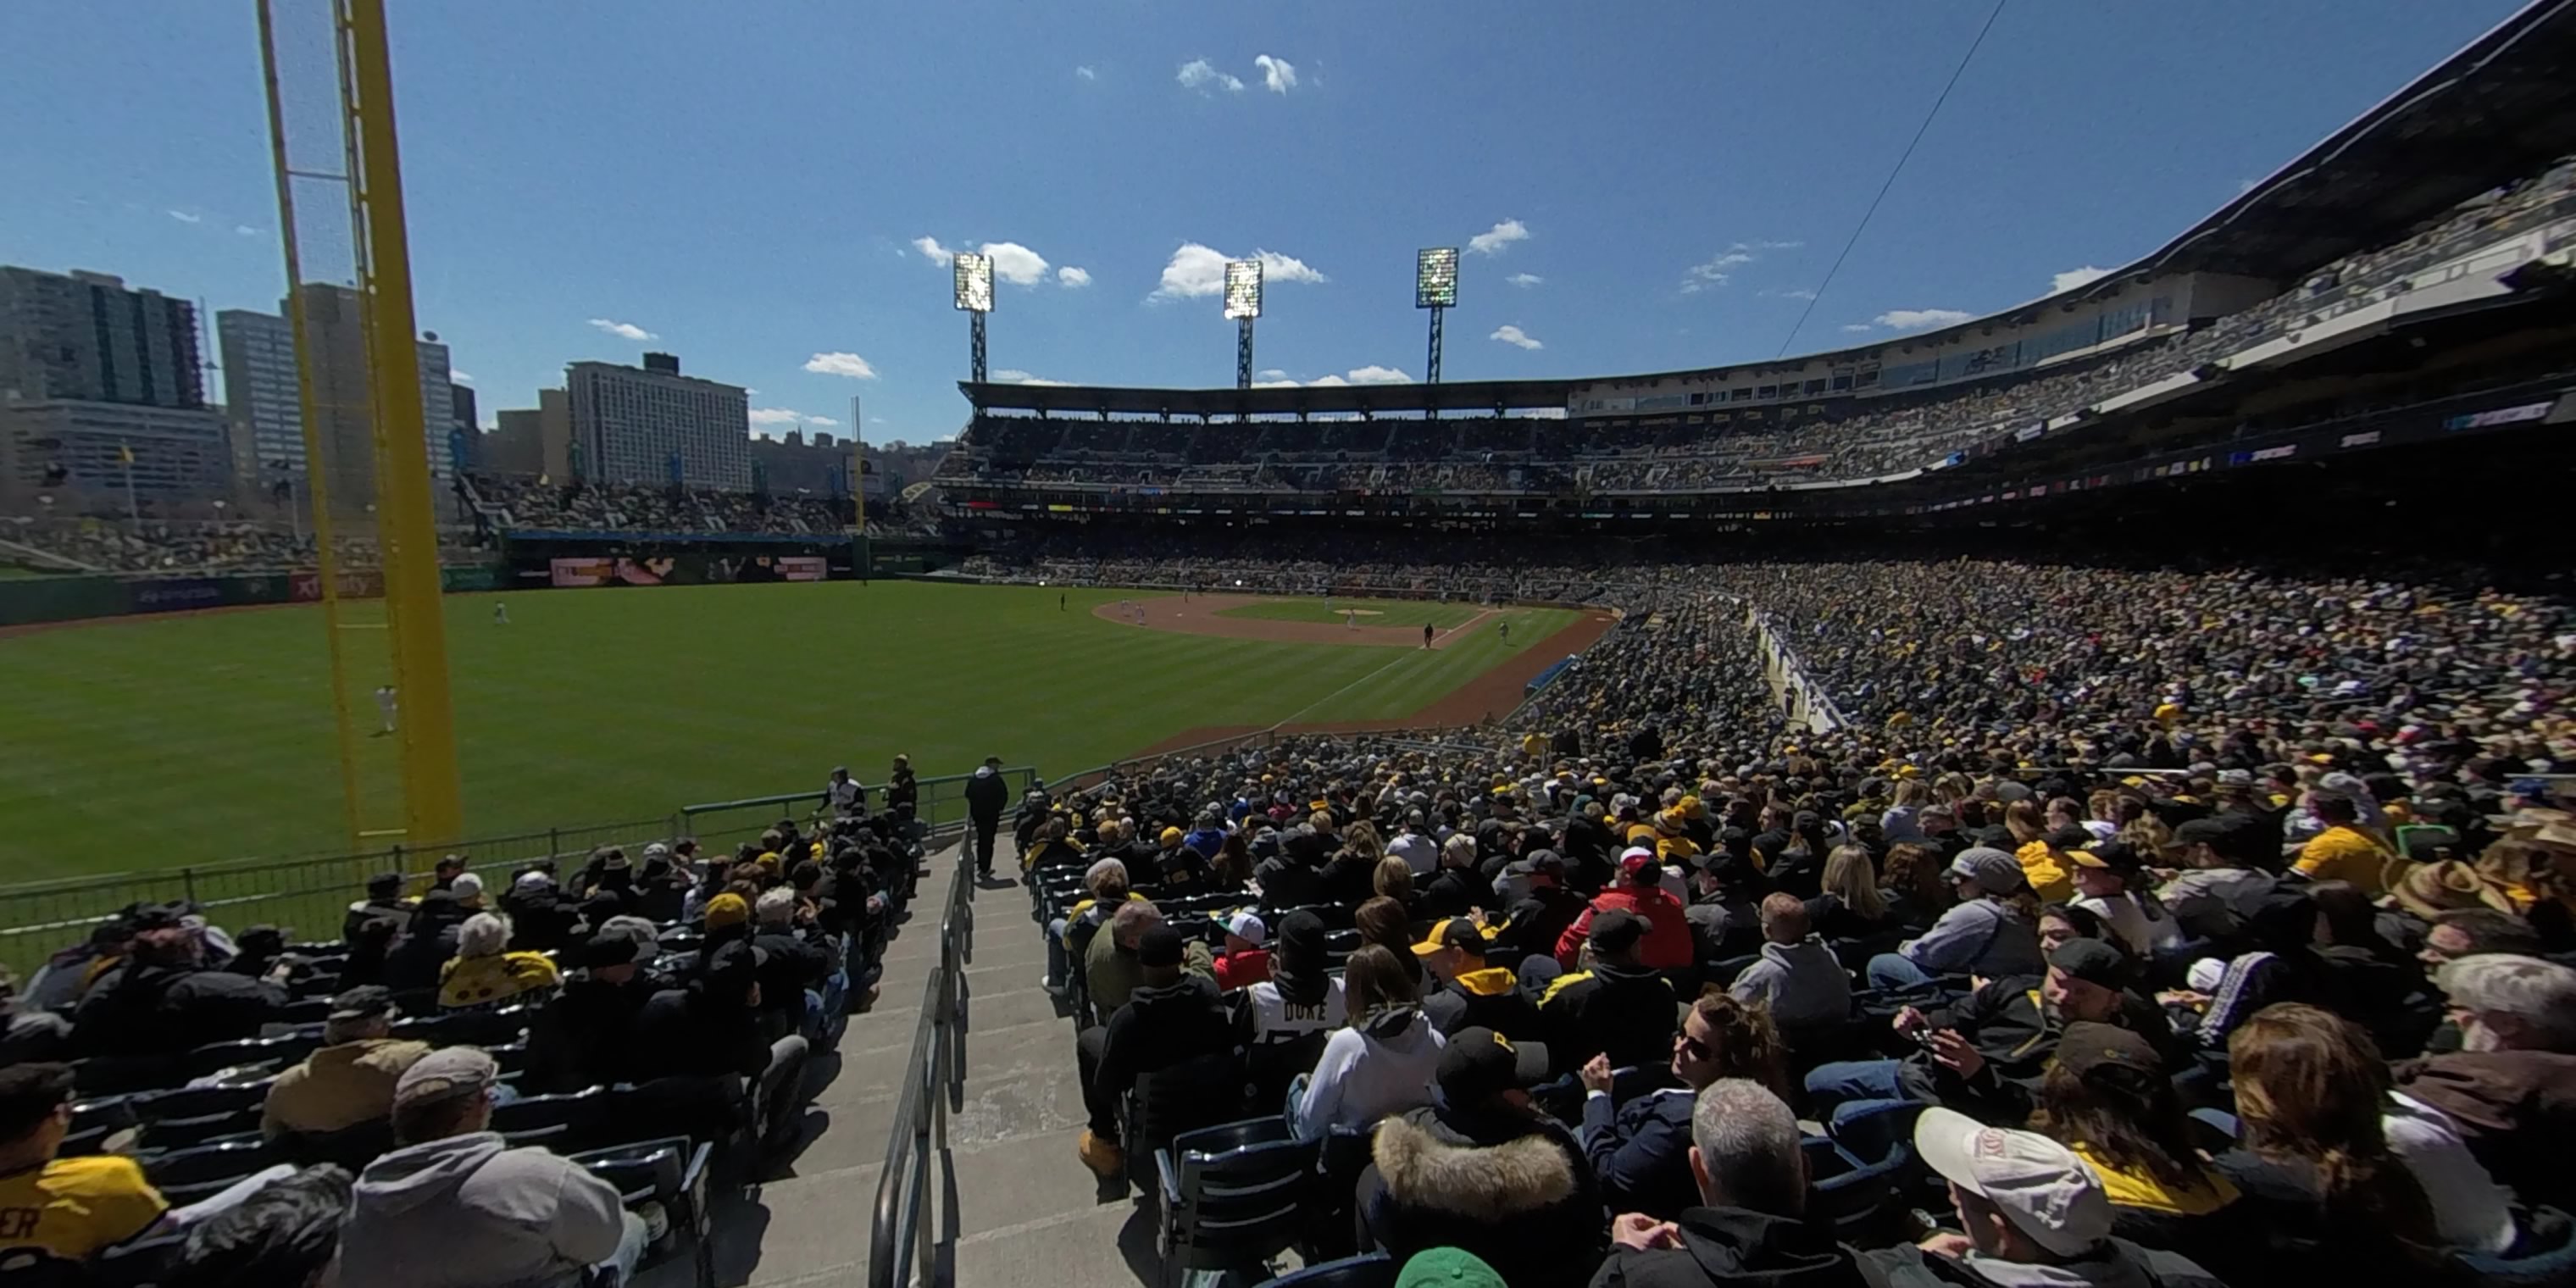 My view from the second deck: First trip to PNC Park following